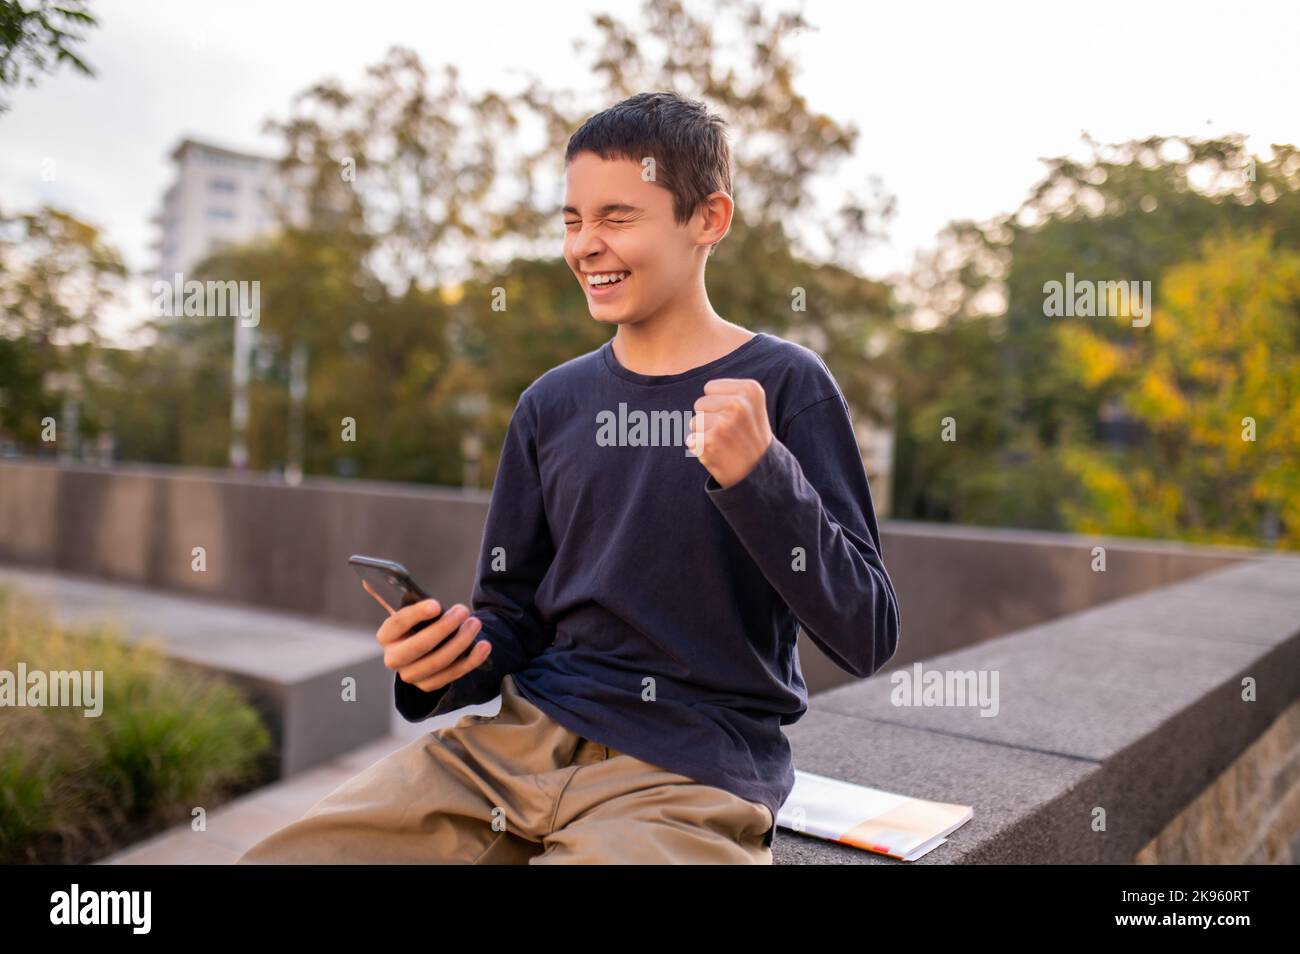 Teen with the smartphone rejoicing at good news Stock Photo